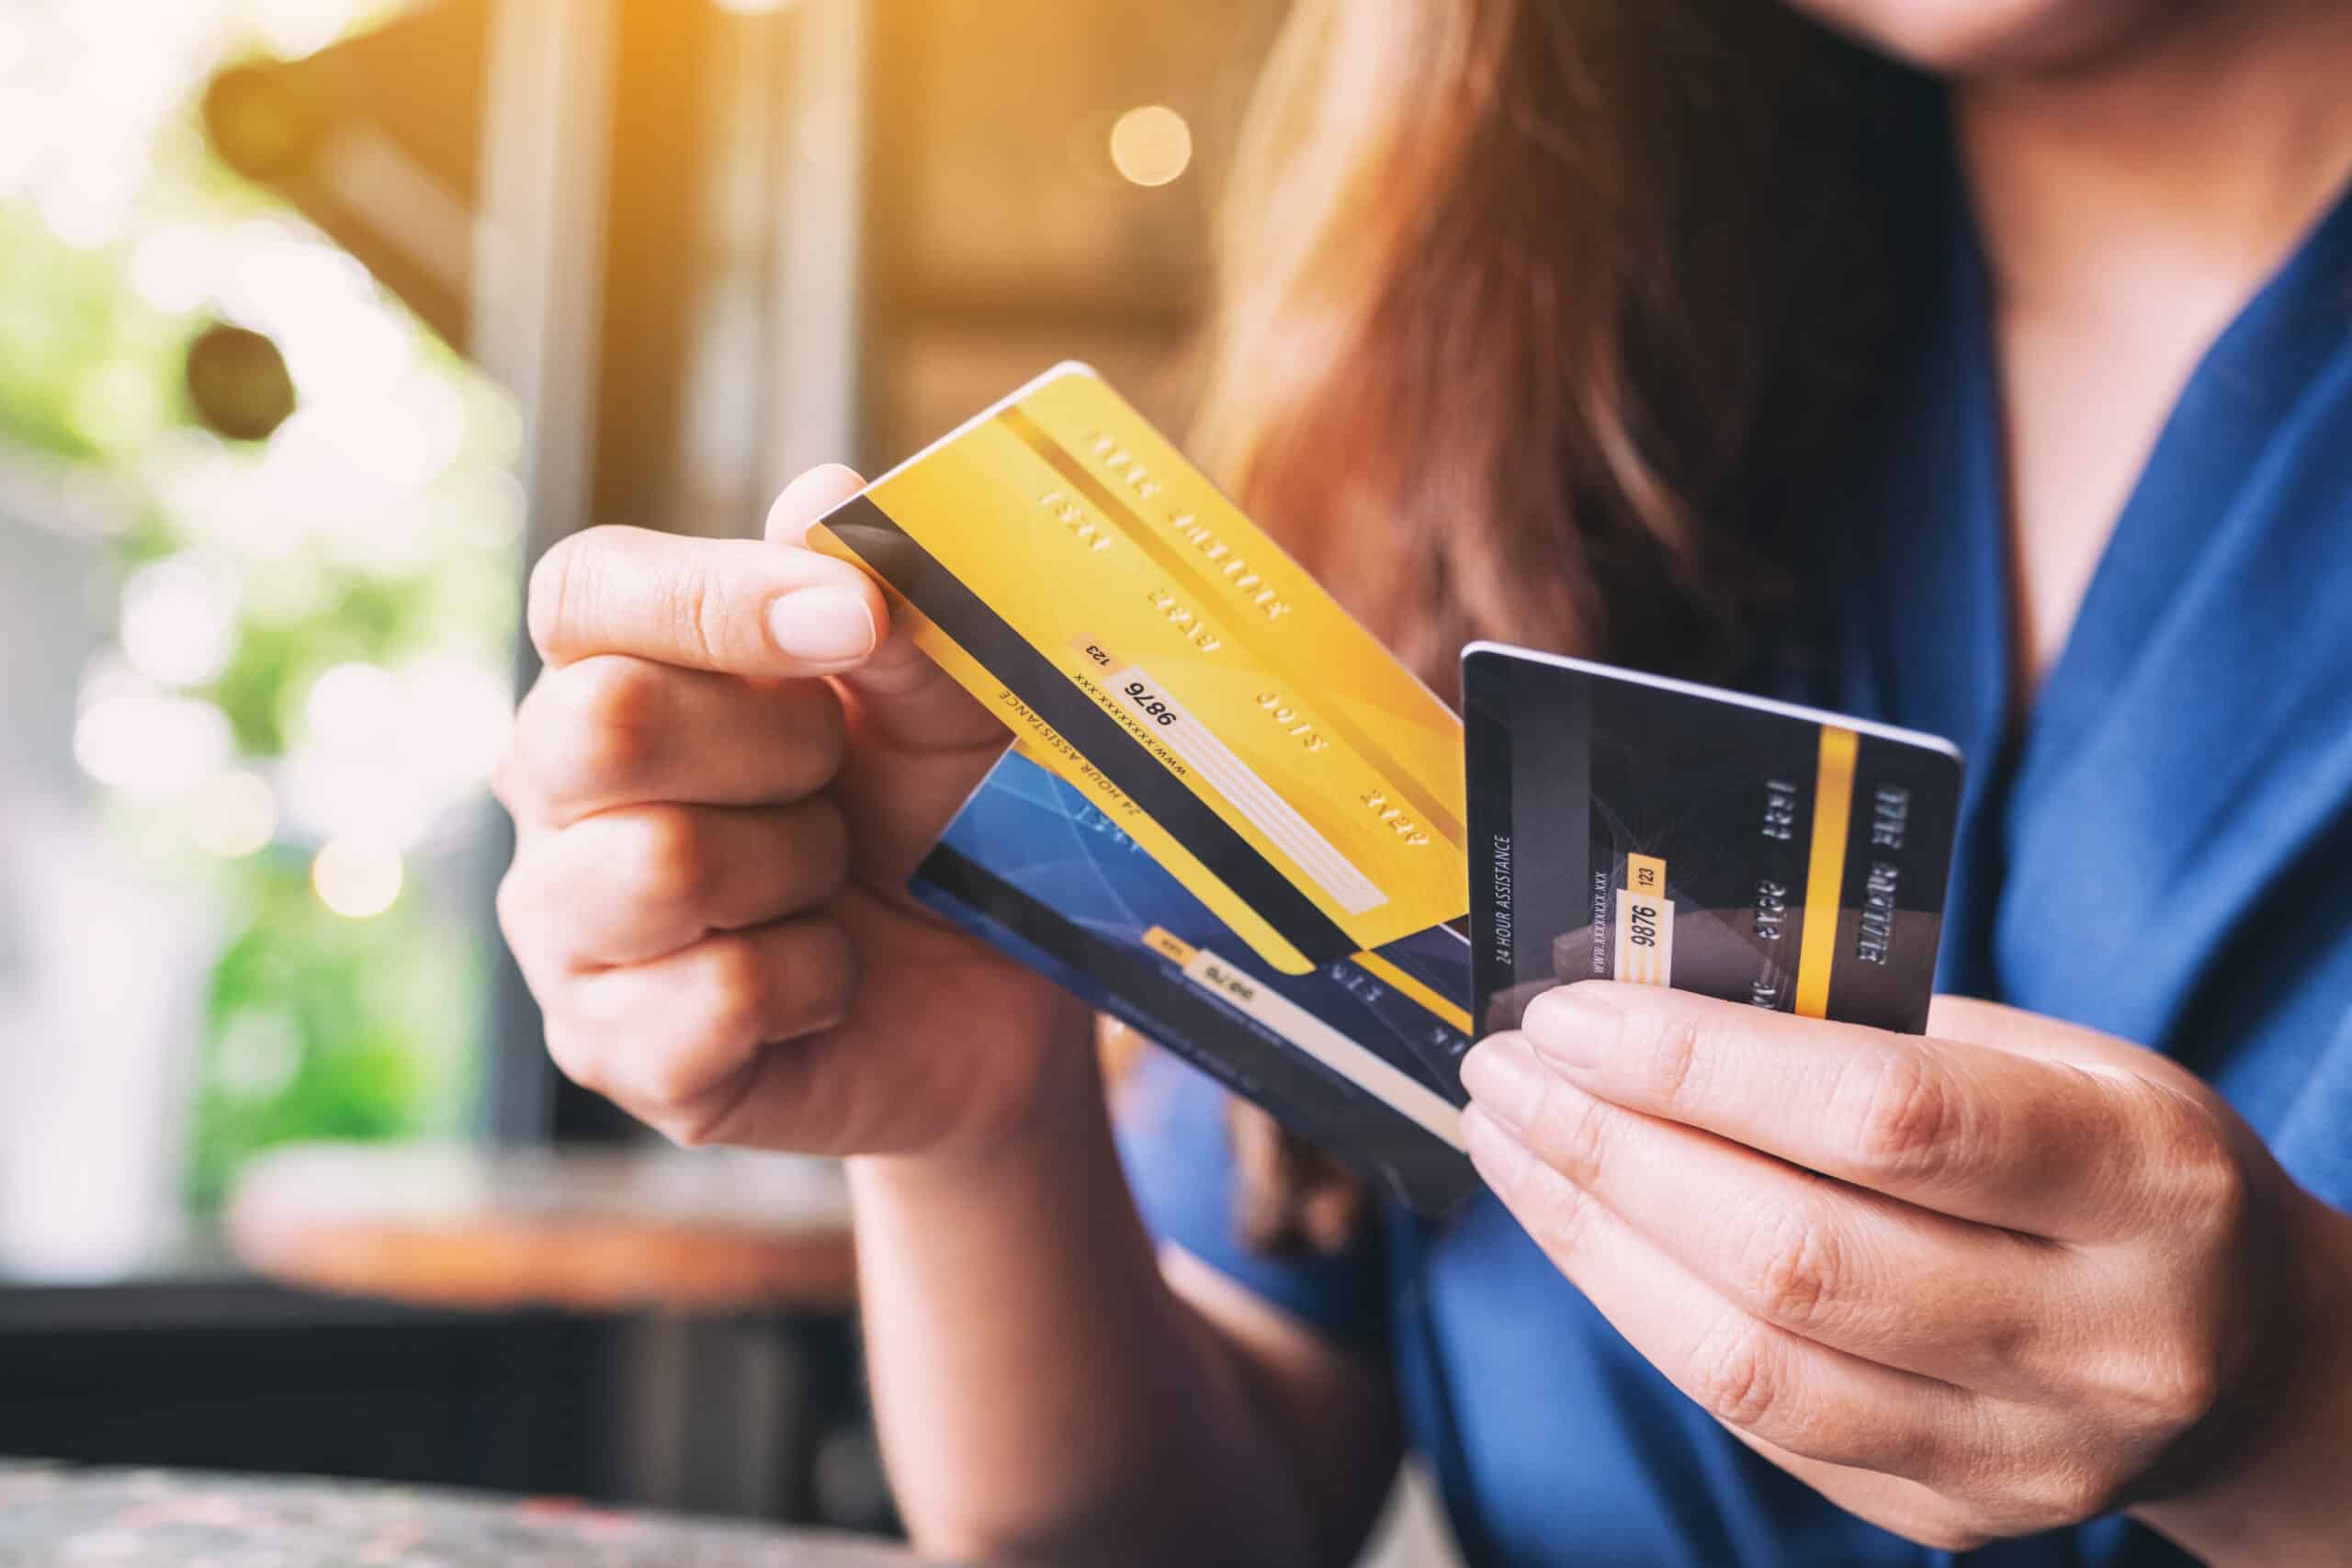 split payments: Closeup image of a woman holding and choosing credit card to use